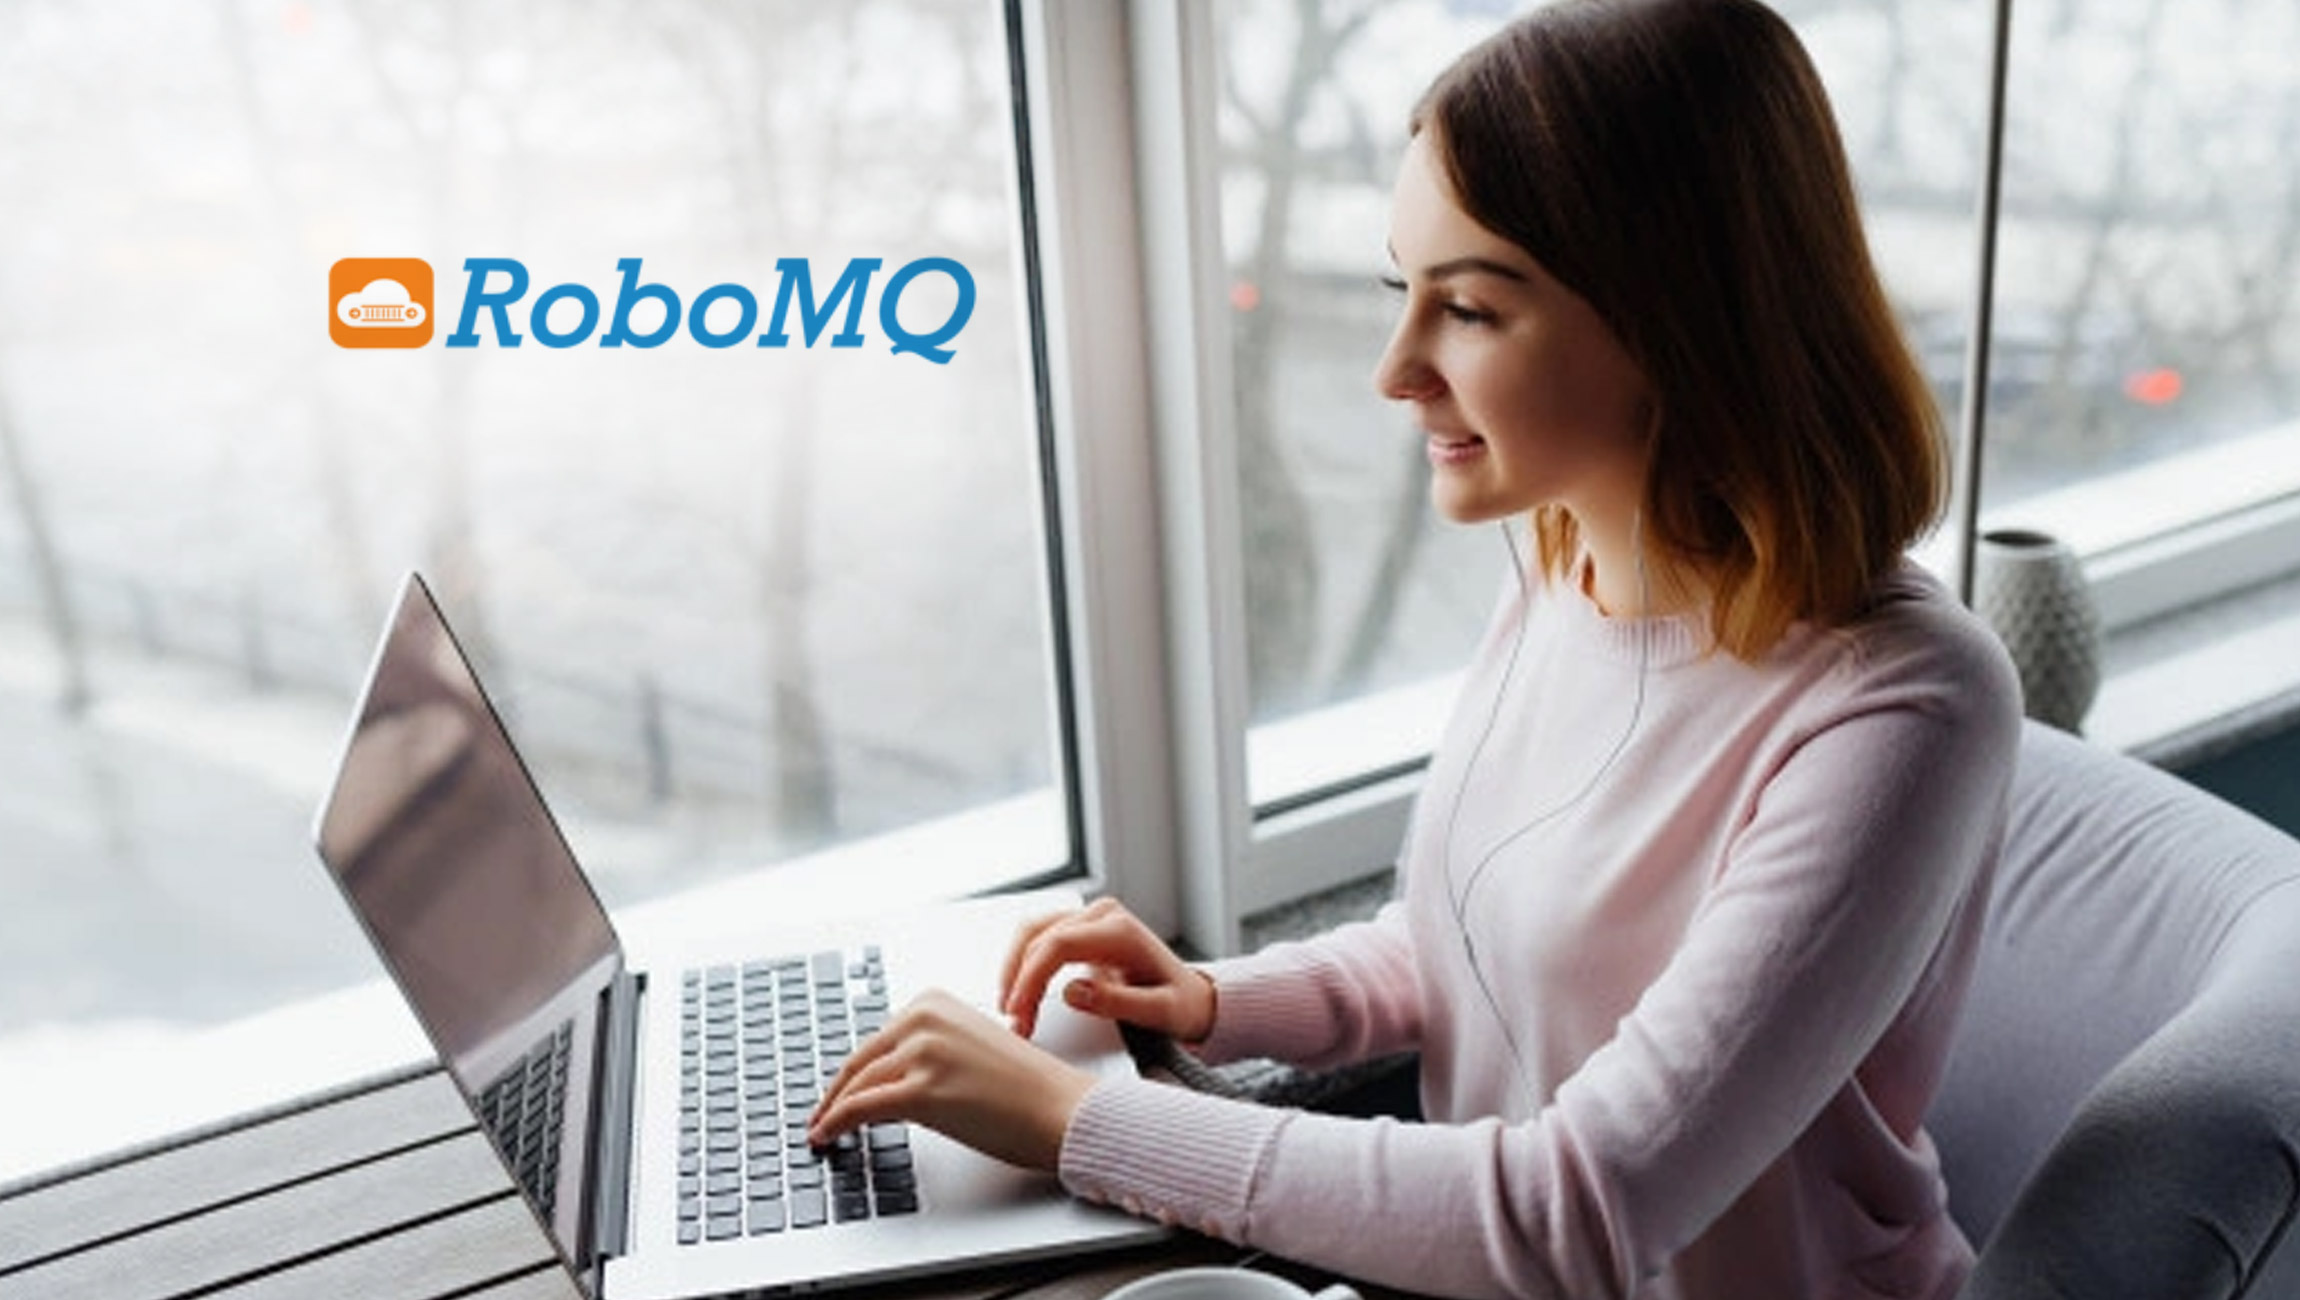 RoboMQ Listed Among Top Integration Platform Service Providers by Forrester